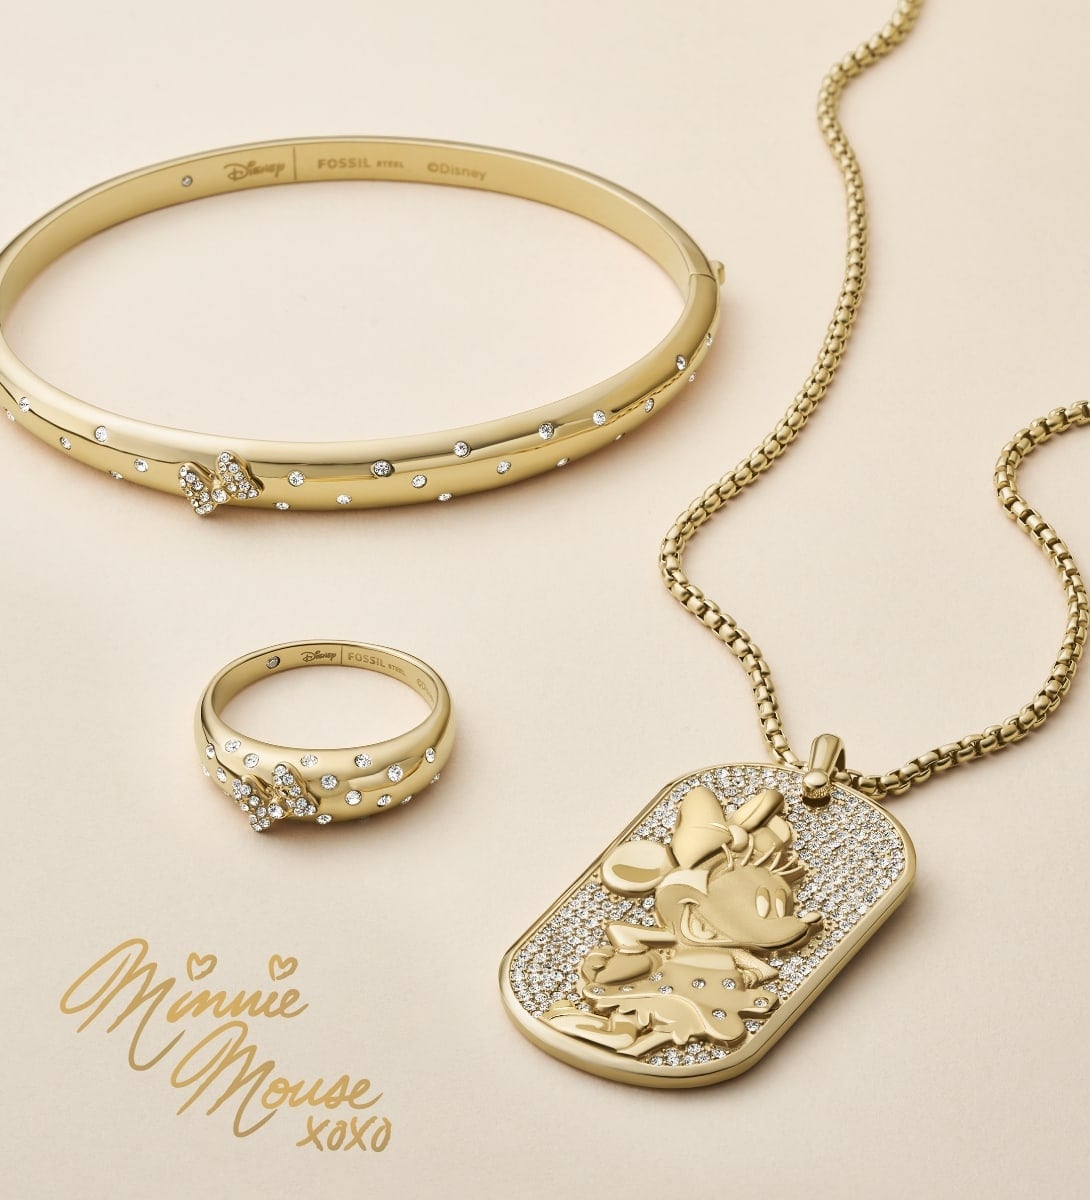 Three pieces of gold-tone Minnie Mouse jewellery, each accented with sparkling crystals to resemble Minnie’s signature bow and polka dots. A bangle bracelet, ring and dog tag-style pendant necklace are artfully arranged on a cream-coloured background. Minnie’s signature is written in gold, along with hearts, x and o marks.